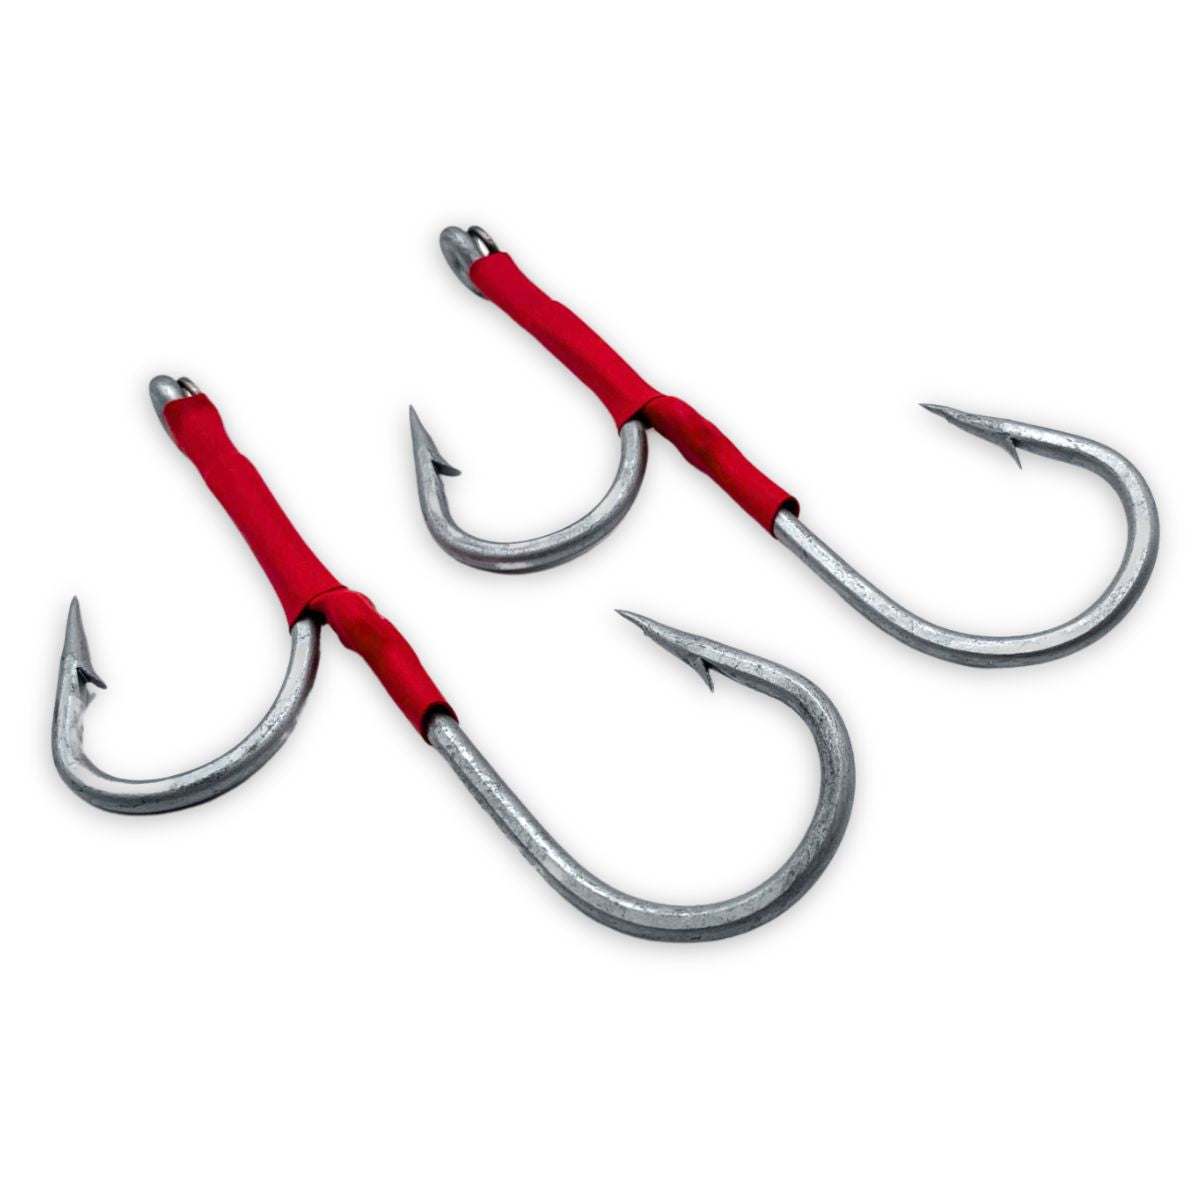 Kamikaze - Twin Pack, Double Assist Hook Rigs, 400lb wire : Size 8/0